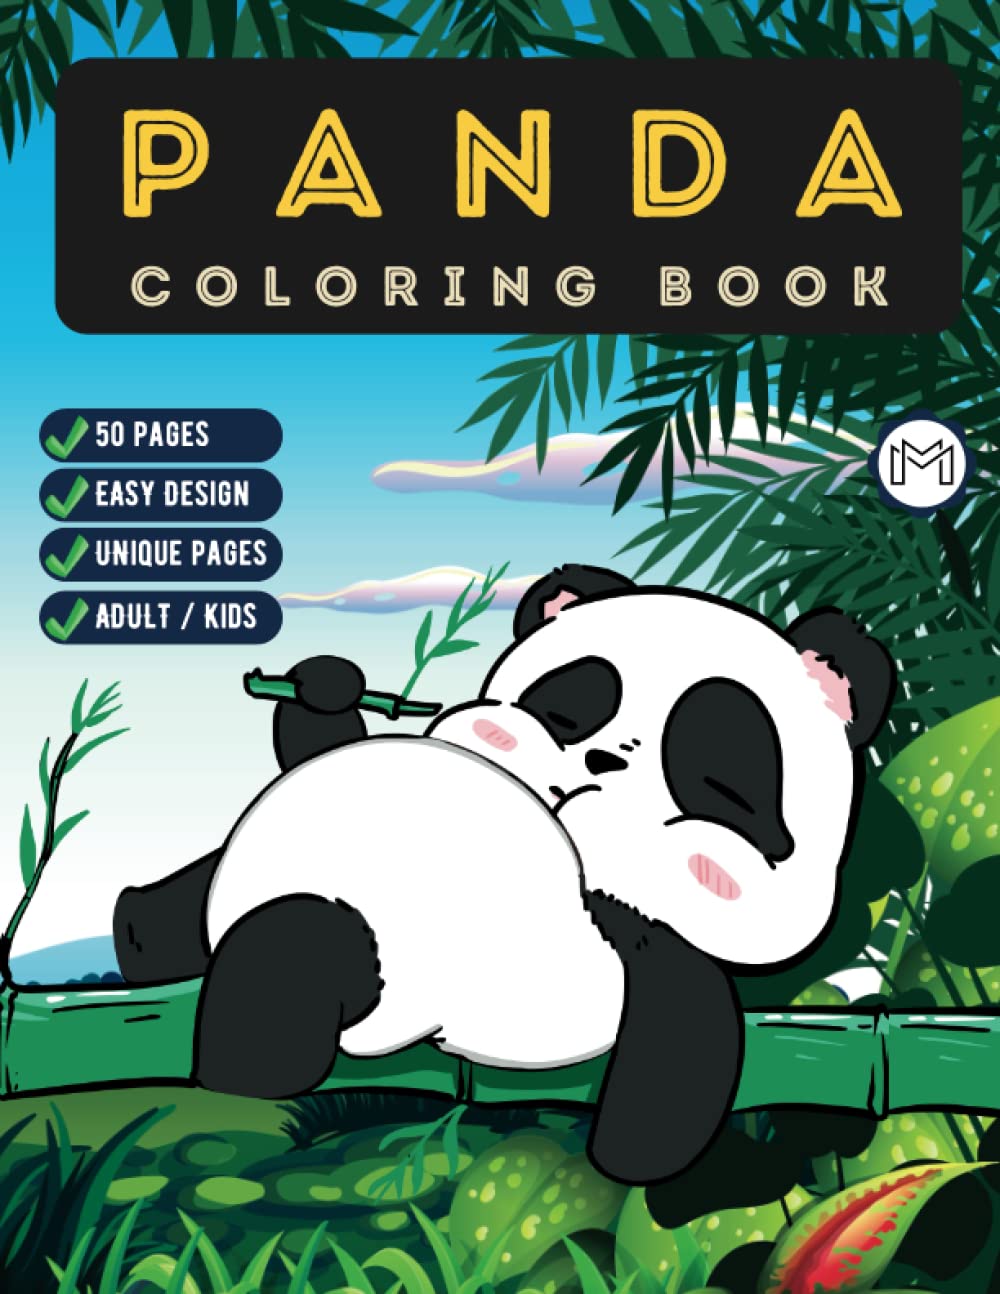 Playful Patterns Coloring Book: Cute and Stress Relieving Coloring Pages (for Kids, Teens and Adults) [Book]